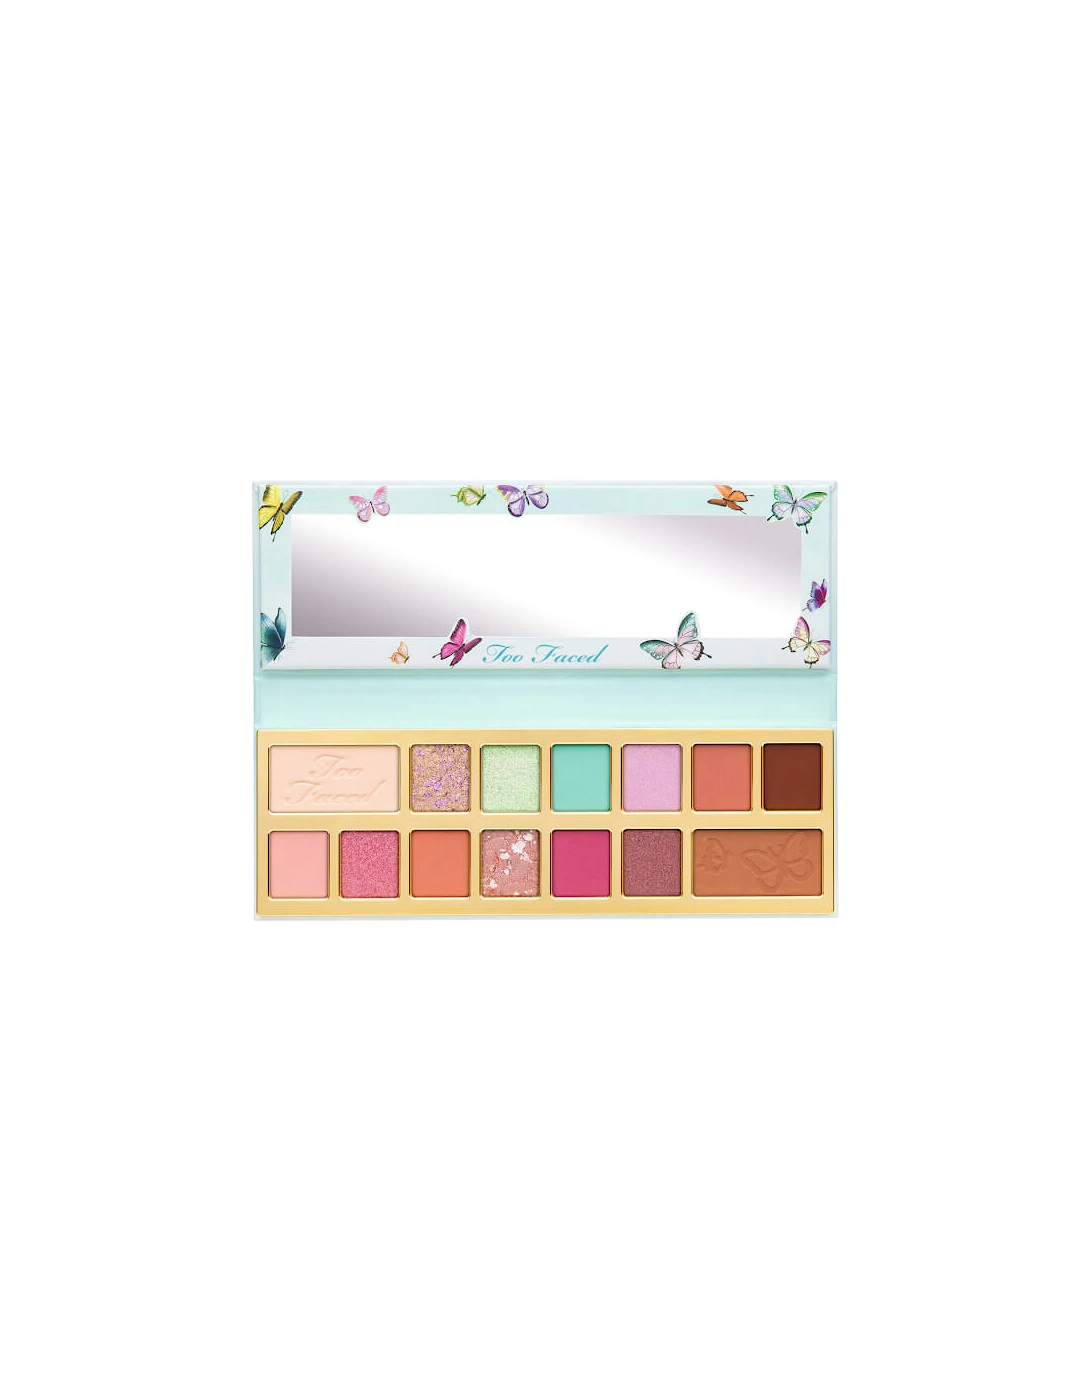 Limited Edition Too Femme Ethereal Eyeshadow Palette, 2 of 1